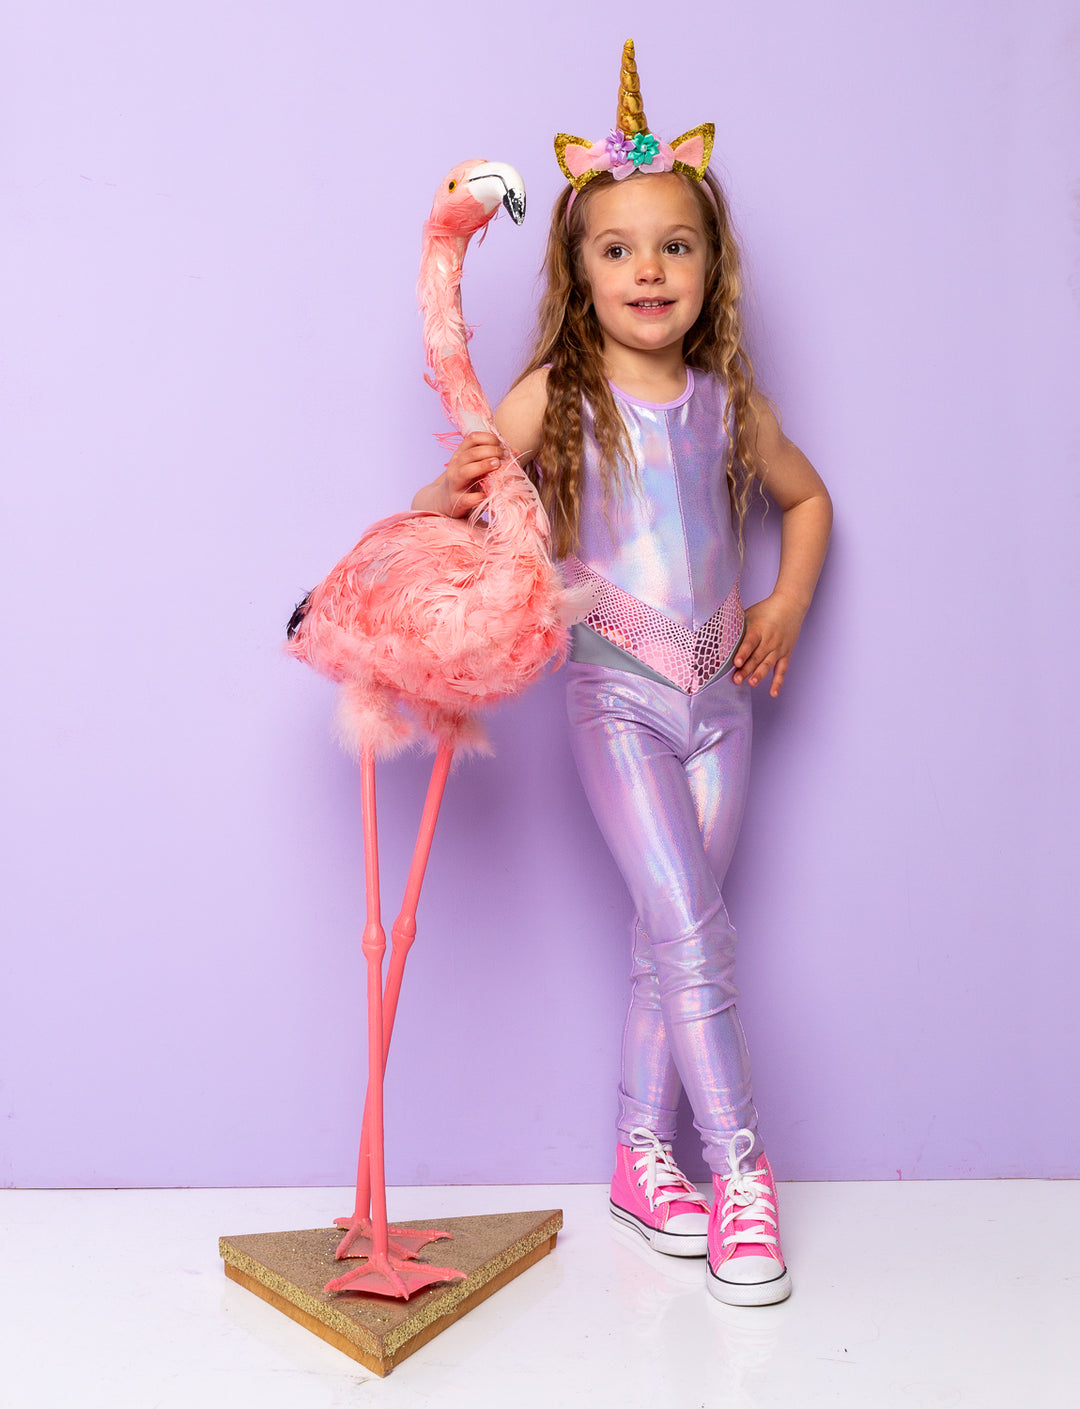 Little girl modelling a lilac holographic onesie or catsuit. She's stood next to a flamingo and has a unicorn horn on her head.